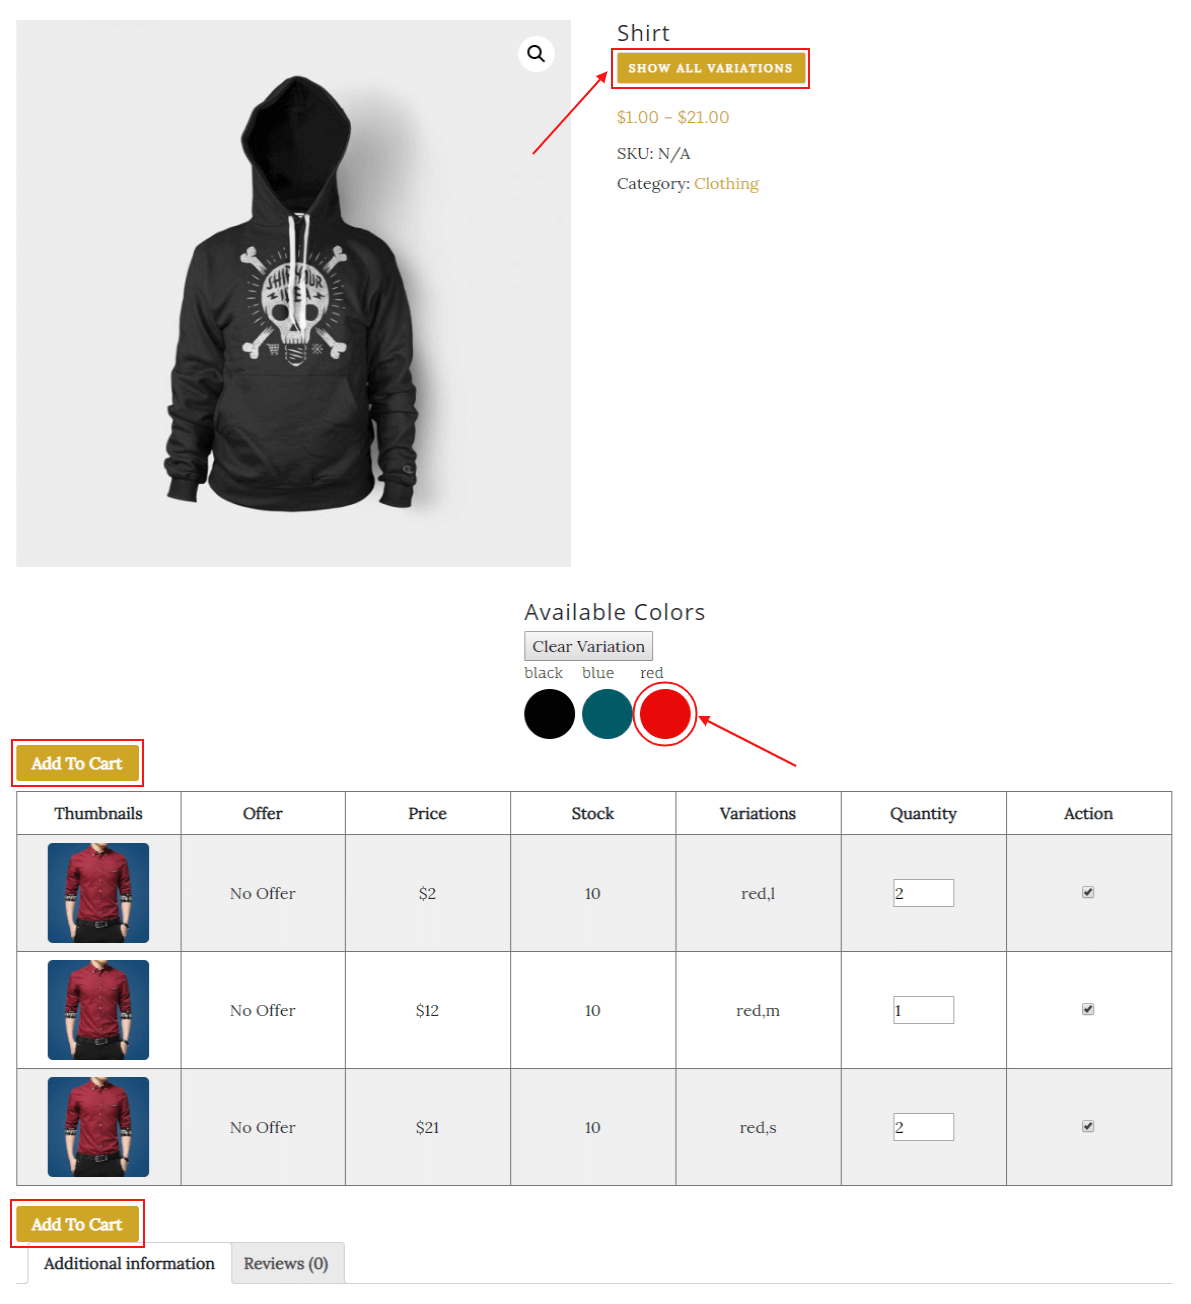 woocommerce-table-view-for-variations-select-color-variation